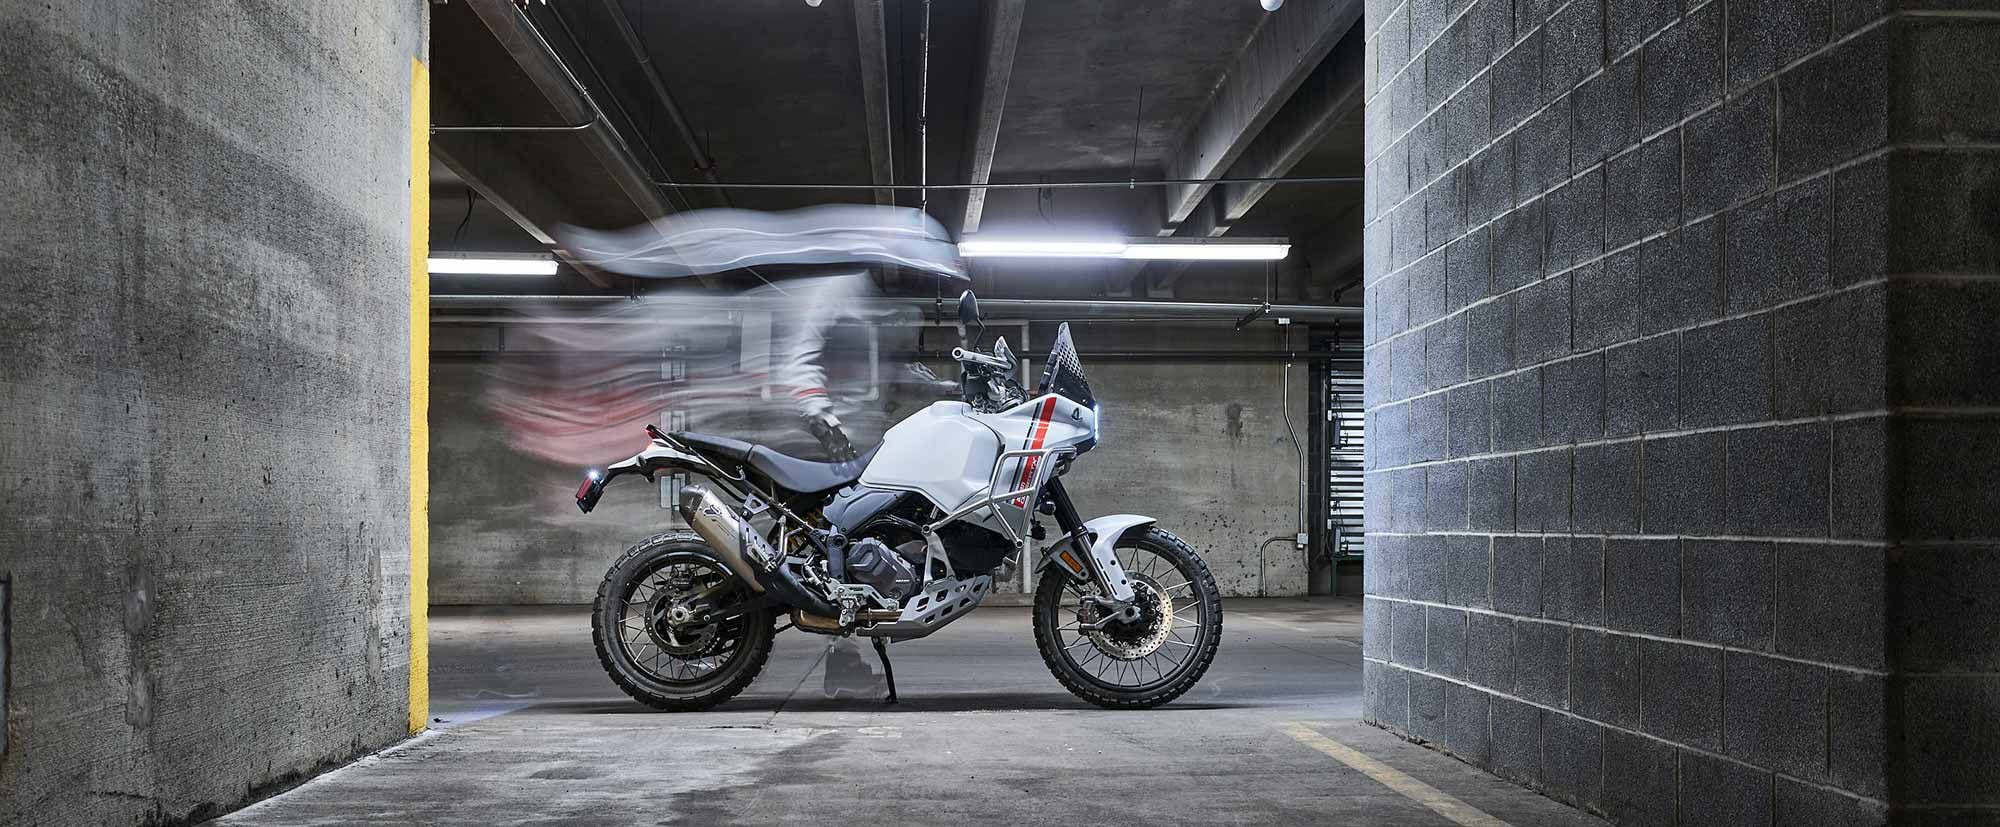 Hopefully buyers will appreciate the versatility of the DesertX and get out of the garage and ride it like they mean it.